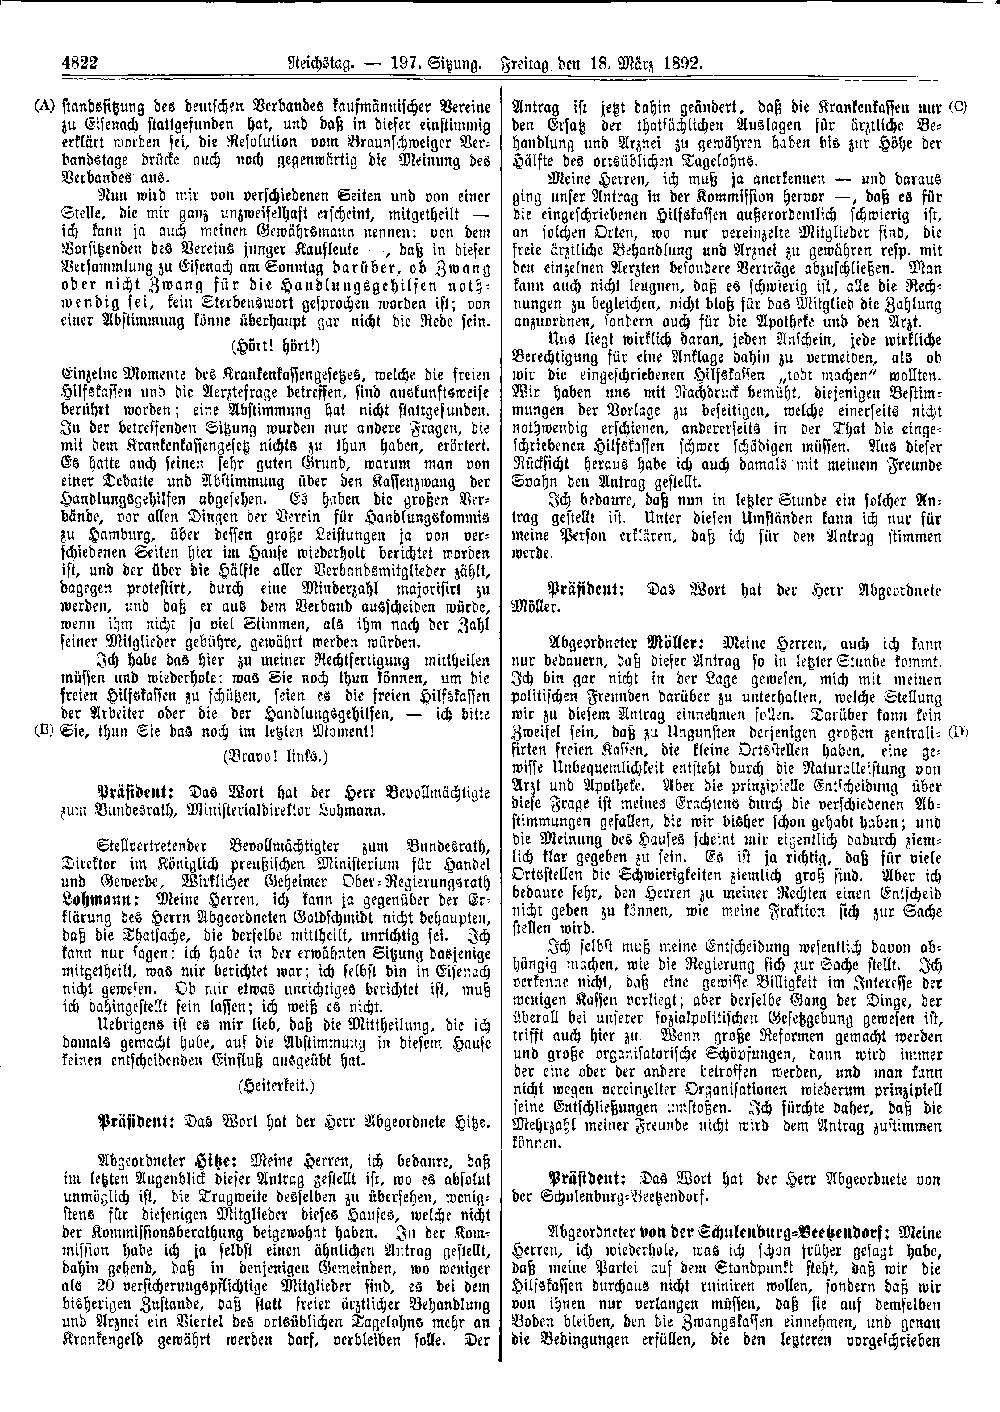 Scan of page 4822